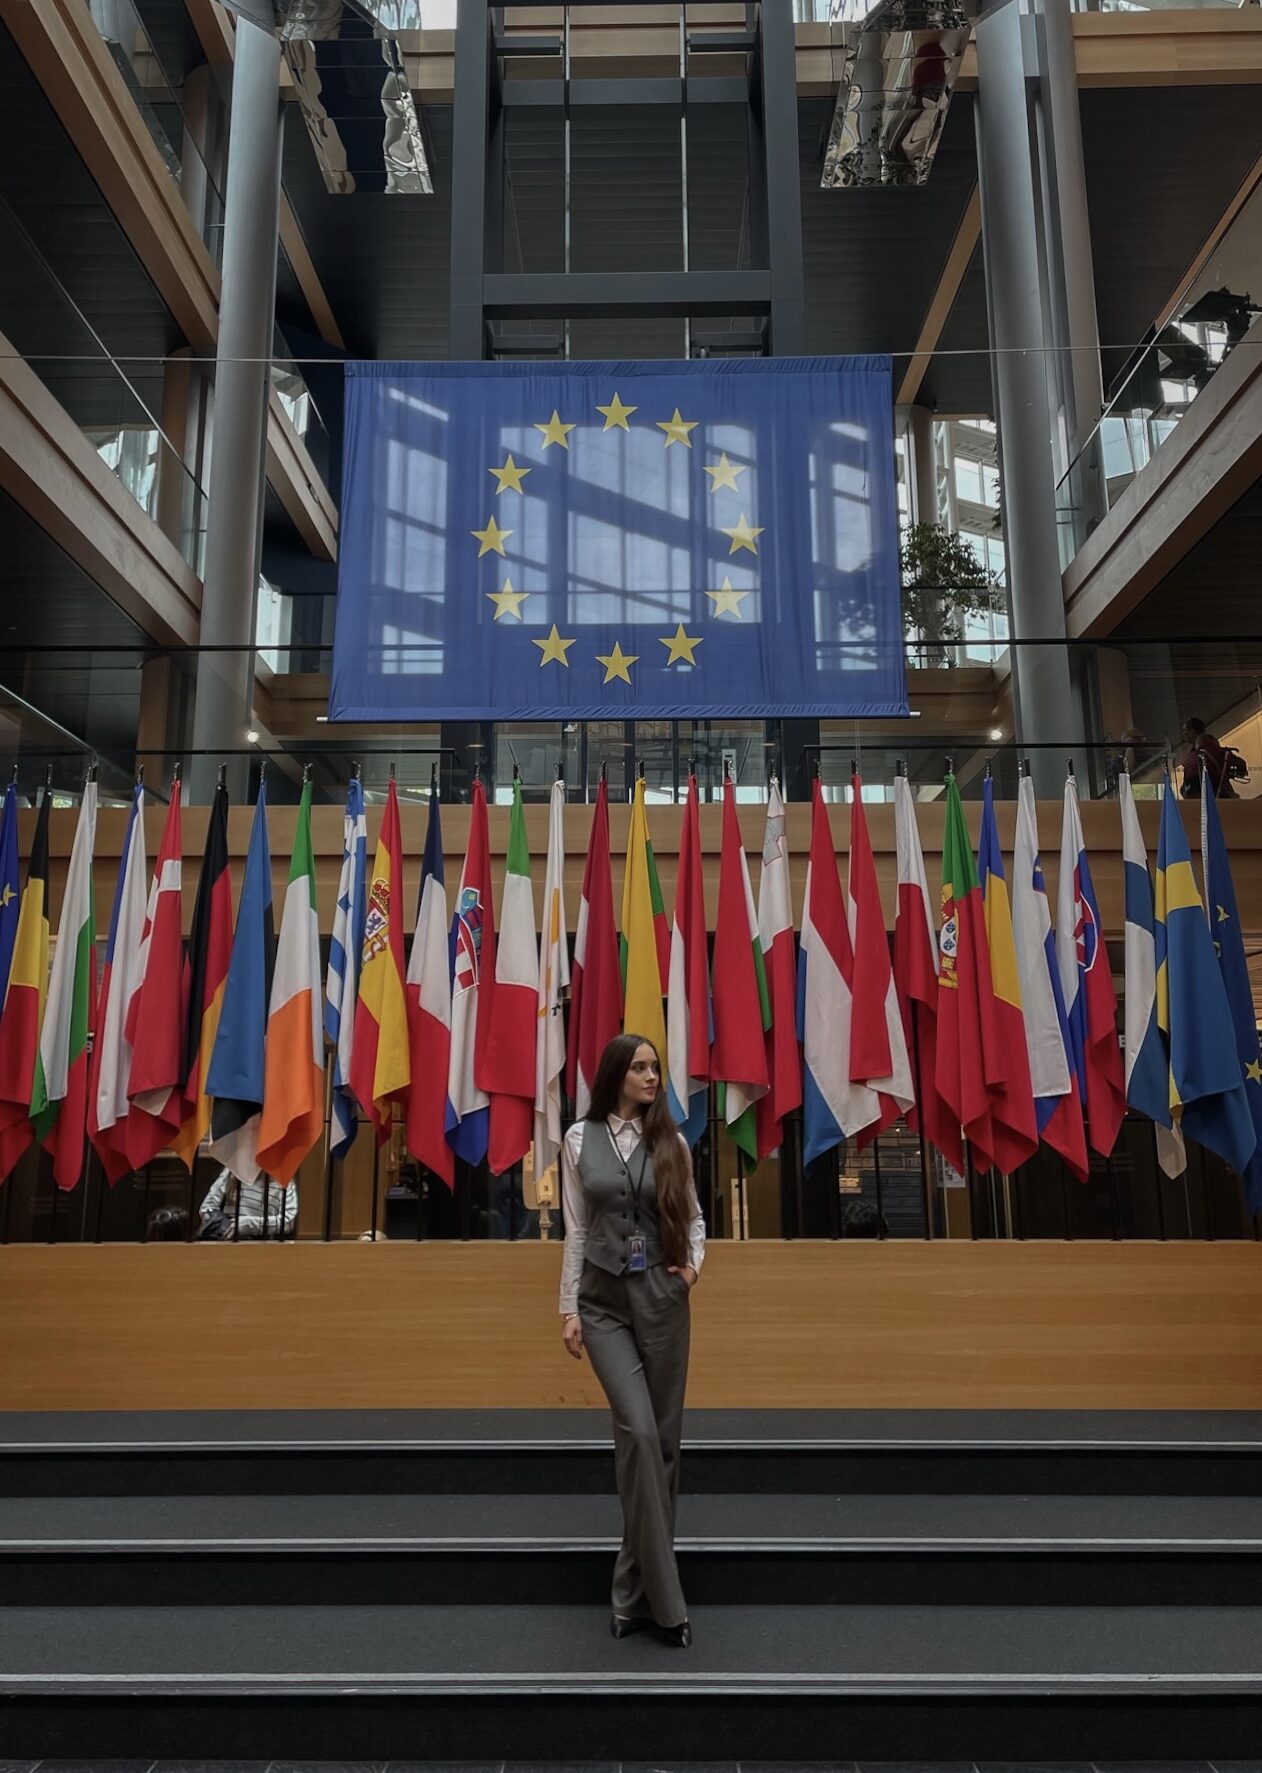 Blog: Experiencing the European Parliament from the inside: Traineeship at the European Parliament